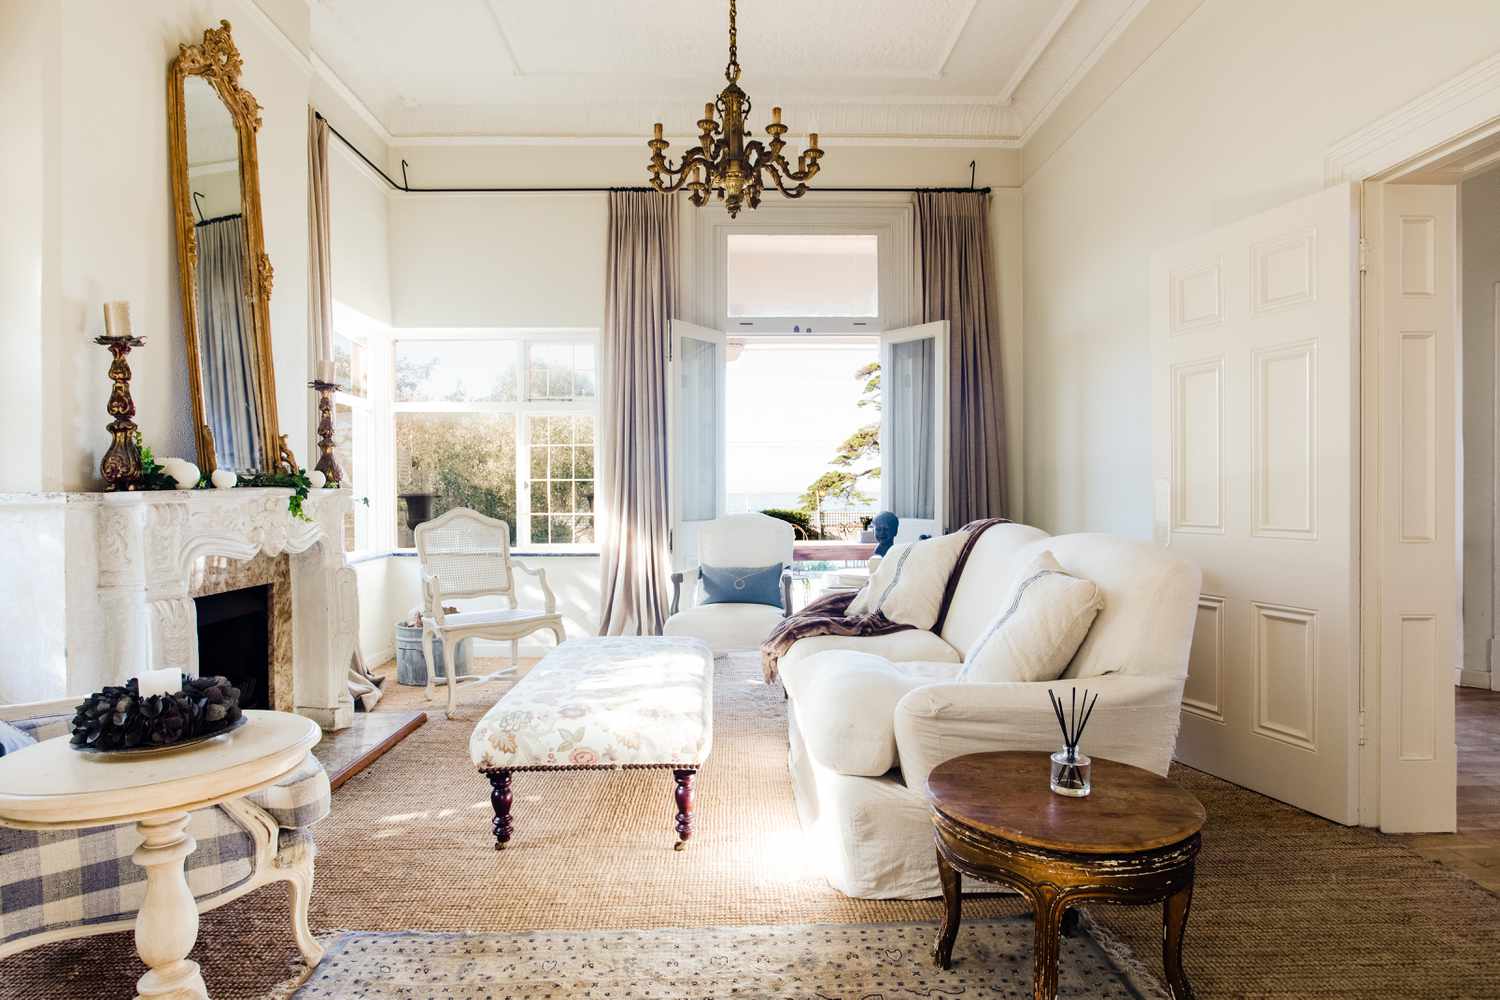 Traditional and elegant styled living room with neutral colors and architectural details